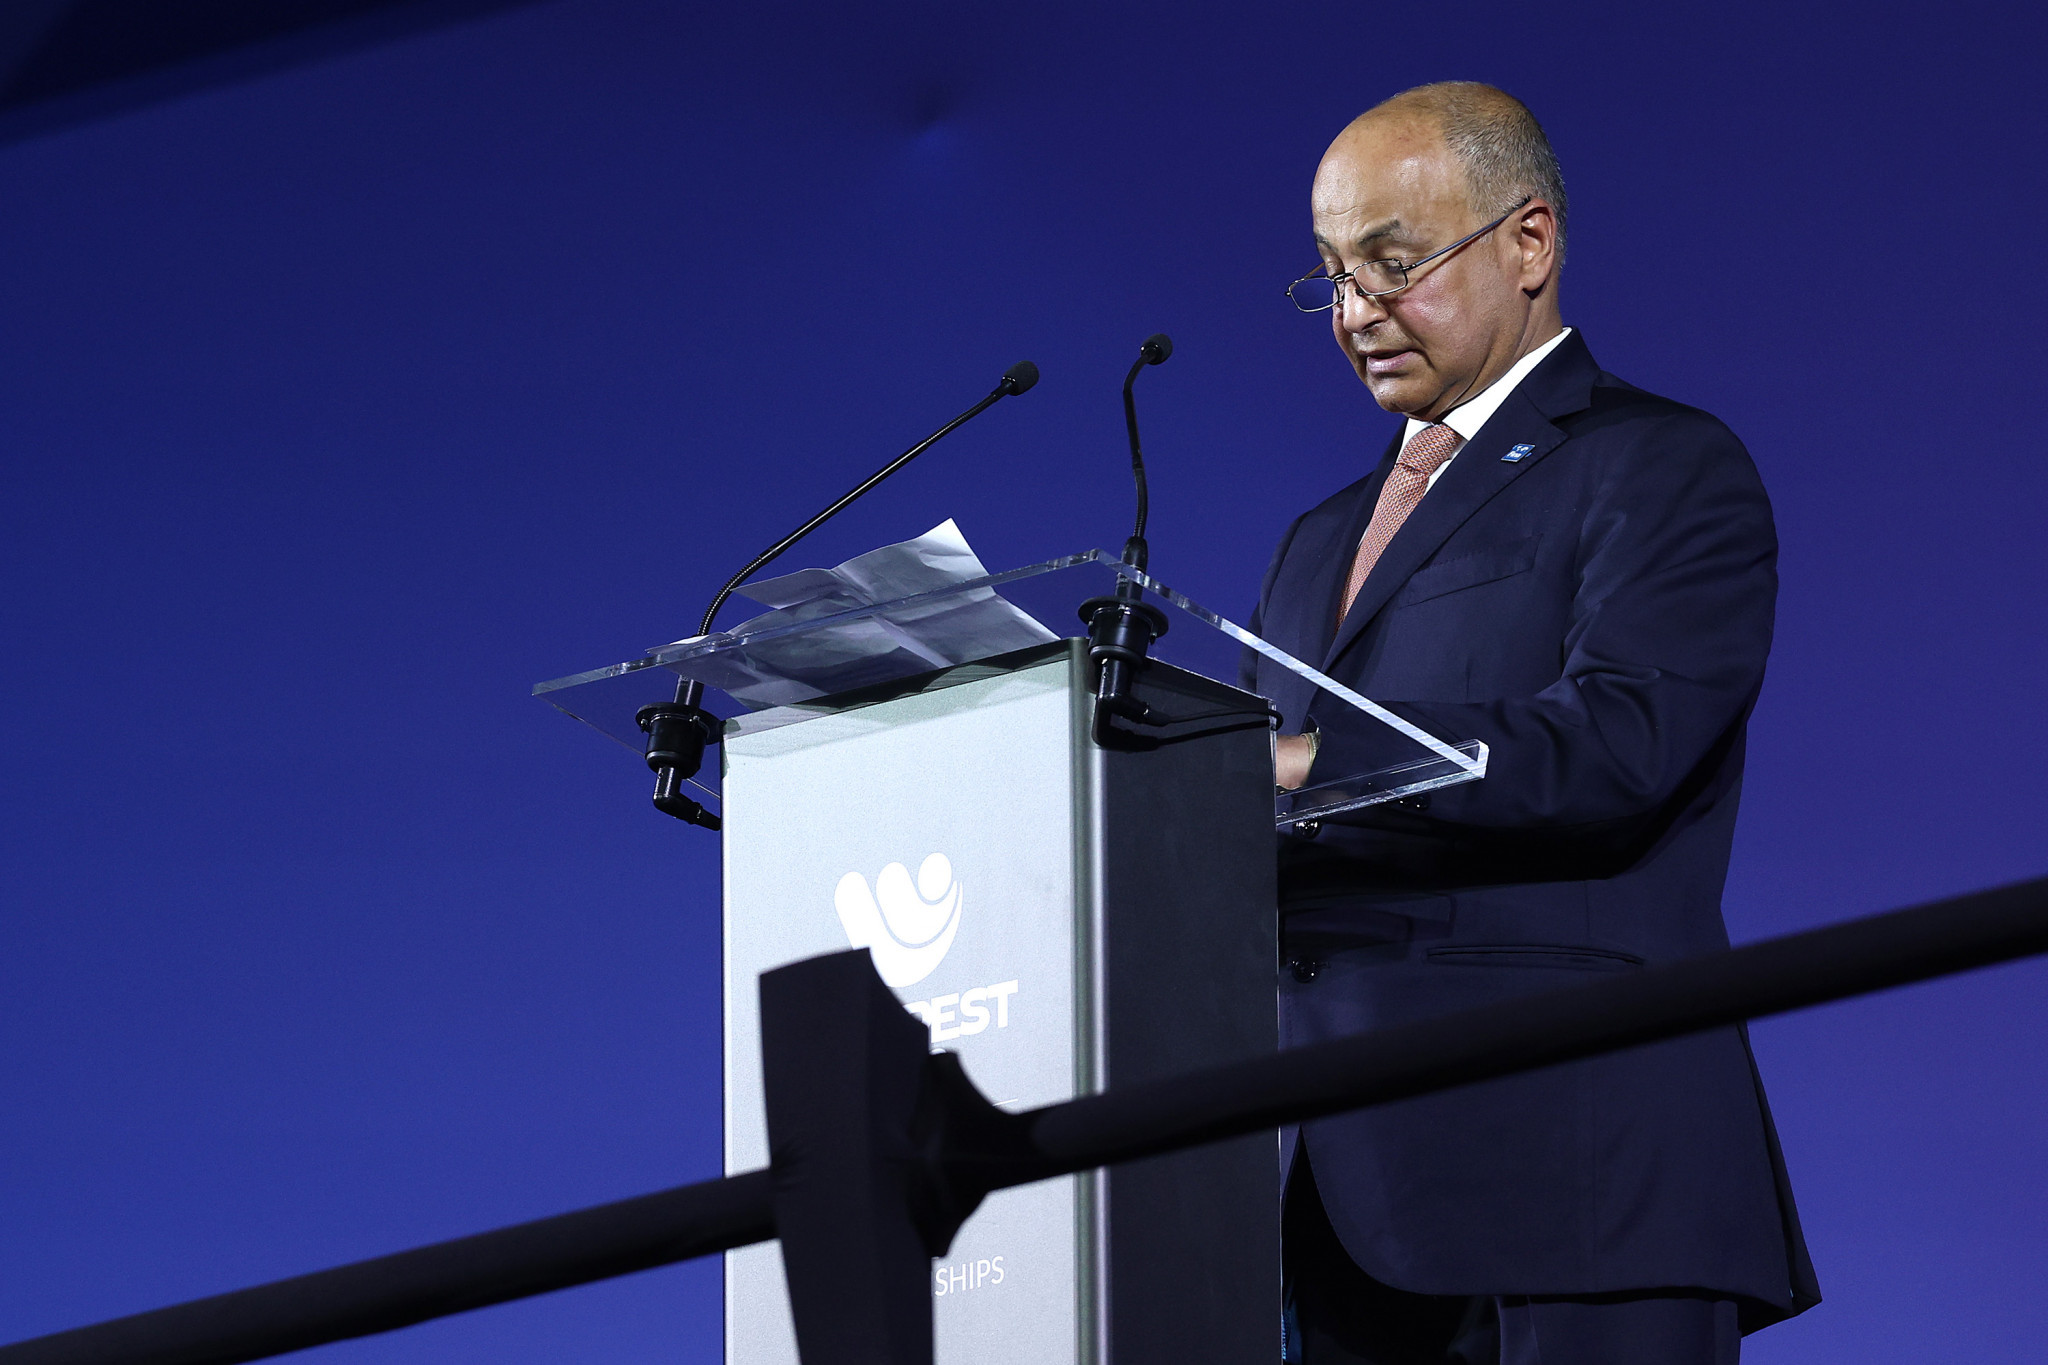 FINA President Husain Al-Musallam said the Athletes' Committee elections represented "an important day for FINA and for sport" ©Getty Images